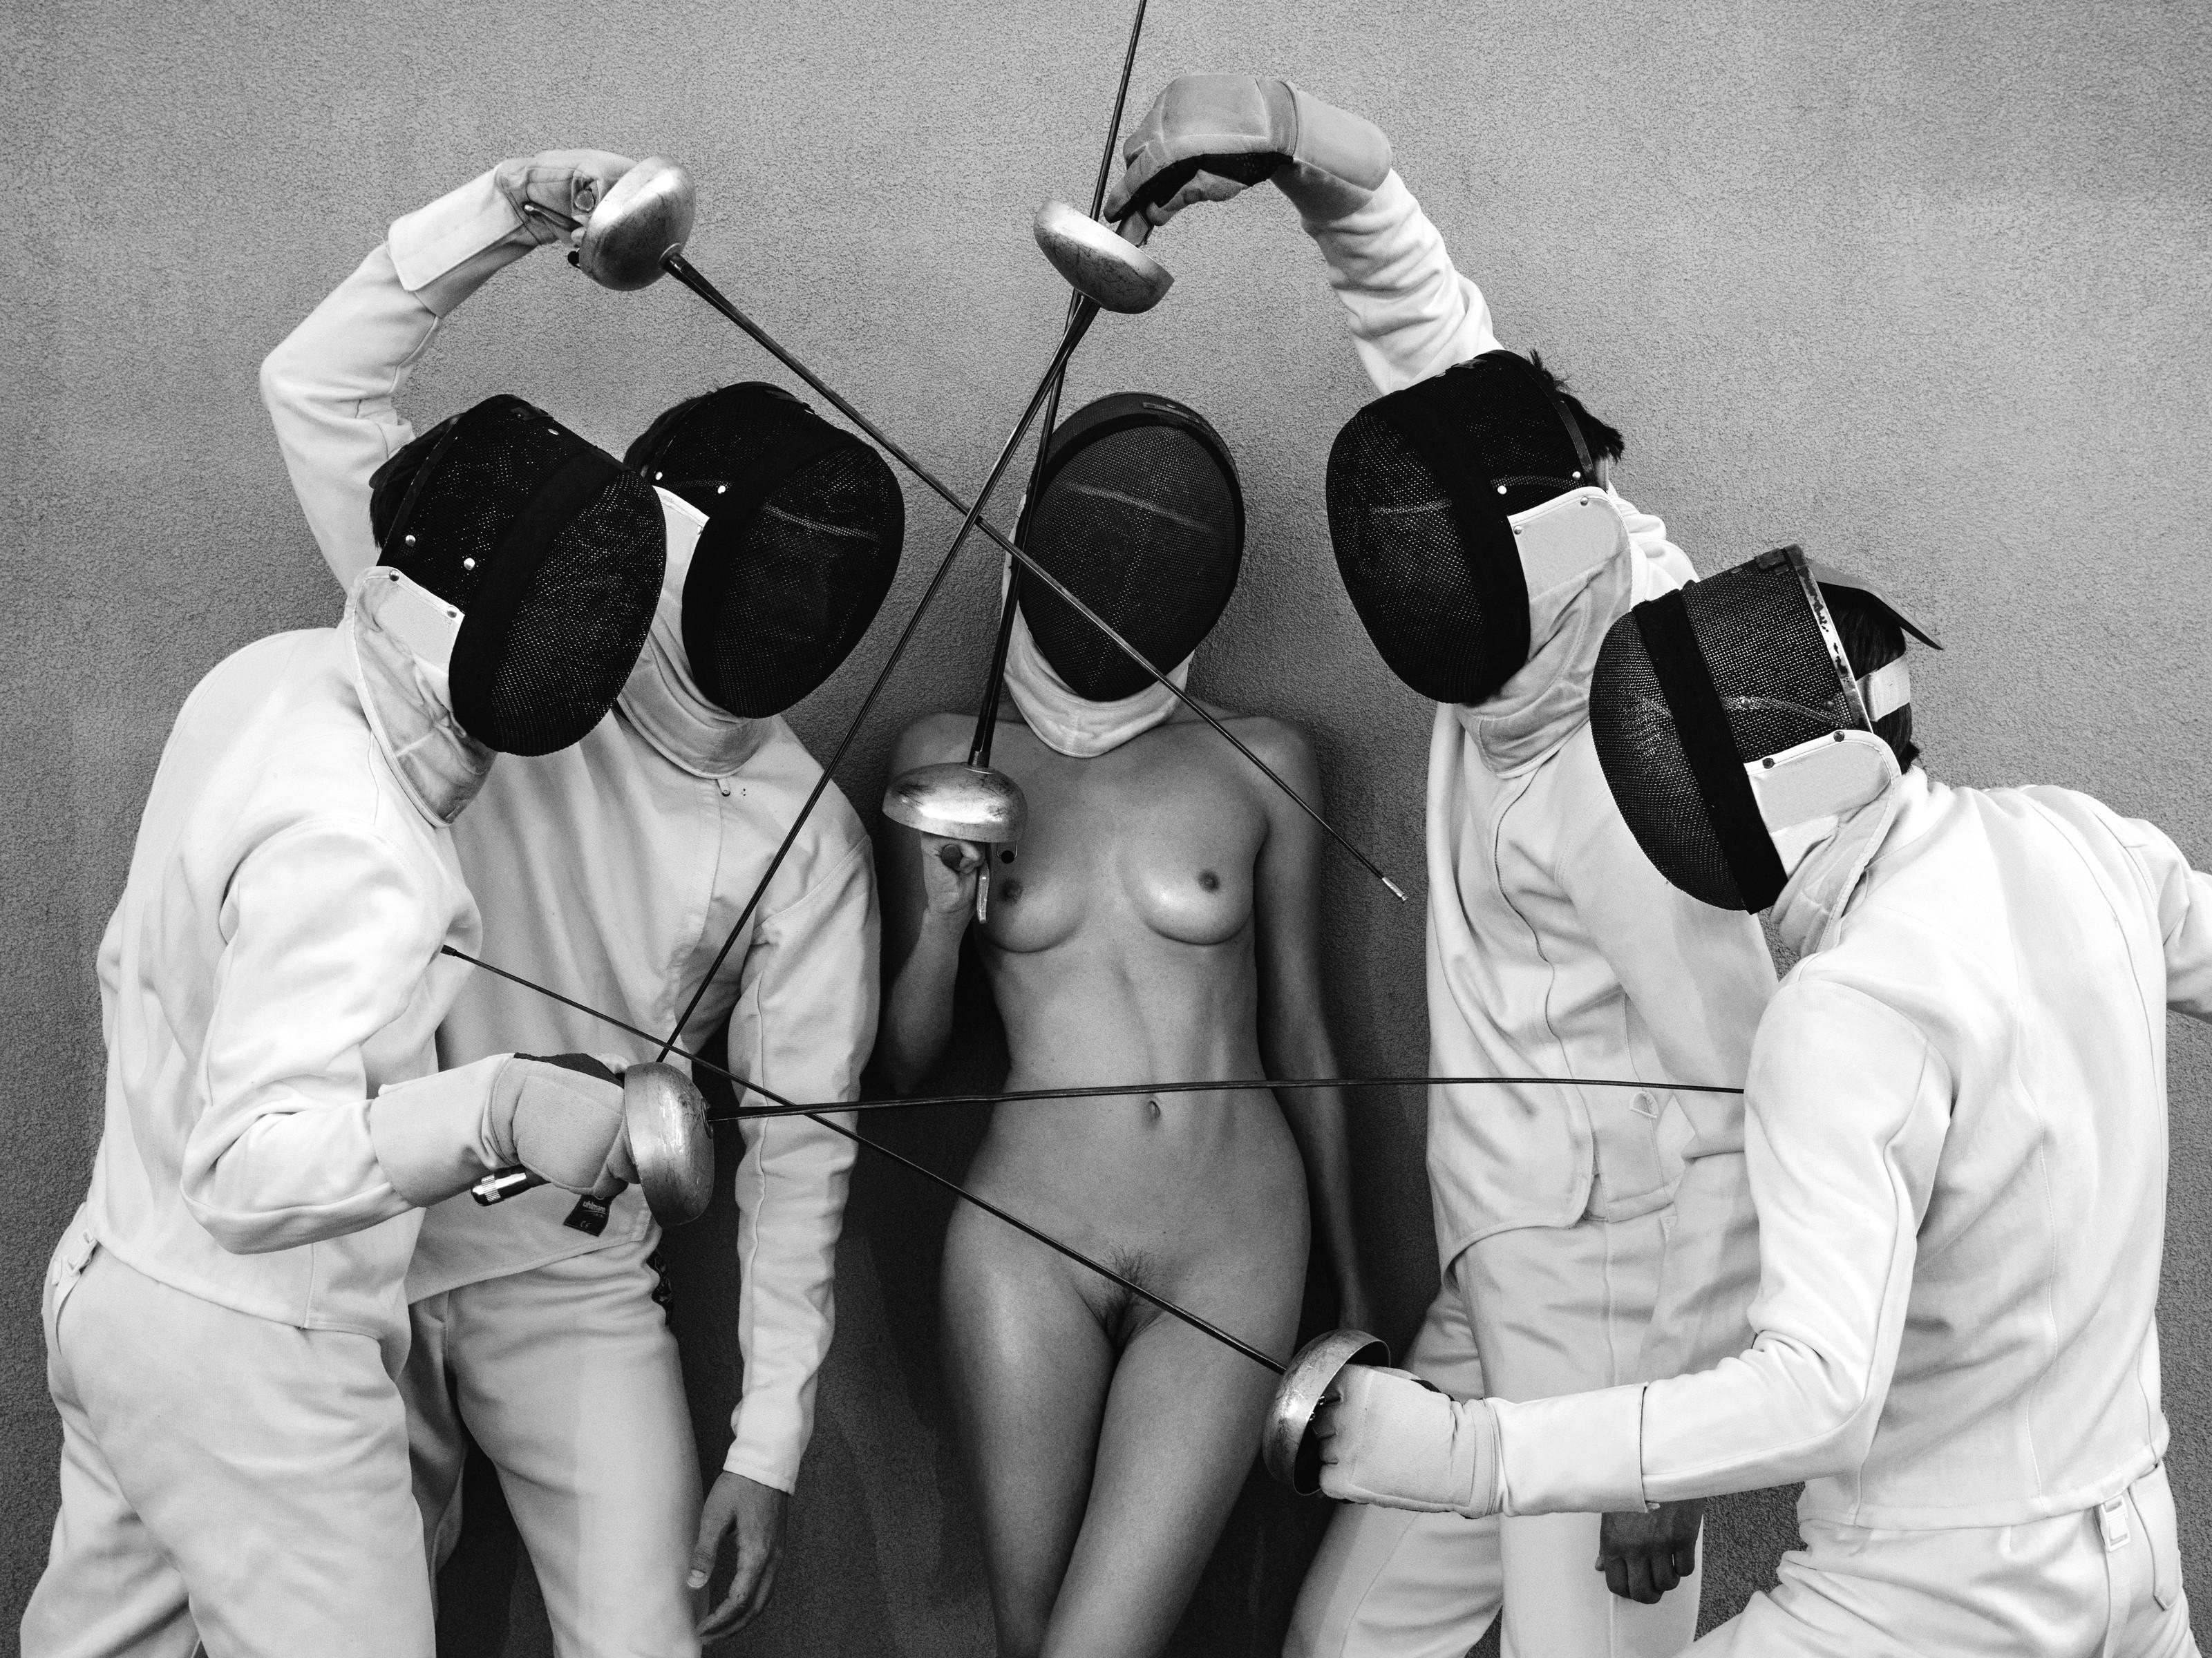 "Fencers 4" Photography 24" x 32" inch  Edition 2/7 by Lukas Dvorak 

24" x 32" inch 
Pigment print on Epson Fine ART paper
2015

Ships rolled in a tube 

ABOUT THE ARTIST
Lukas Dvorak is a Czech photographer born in Prague in 1982. His preference